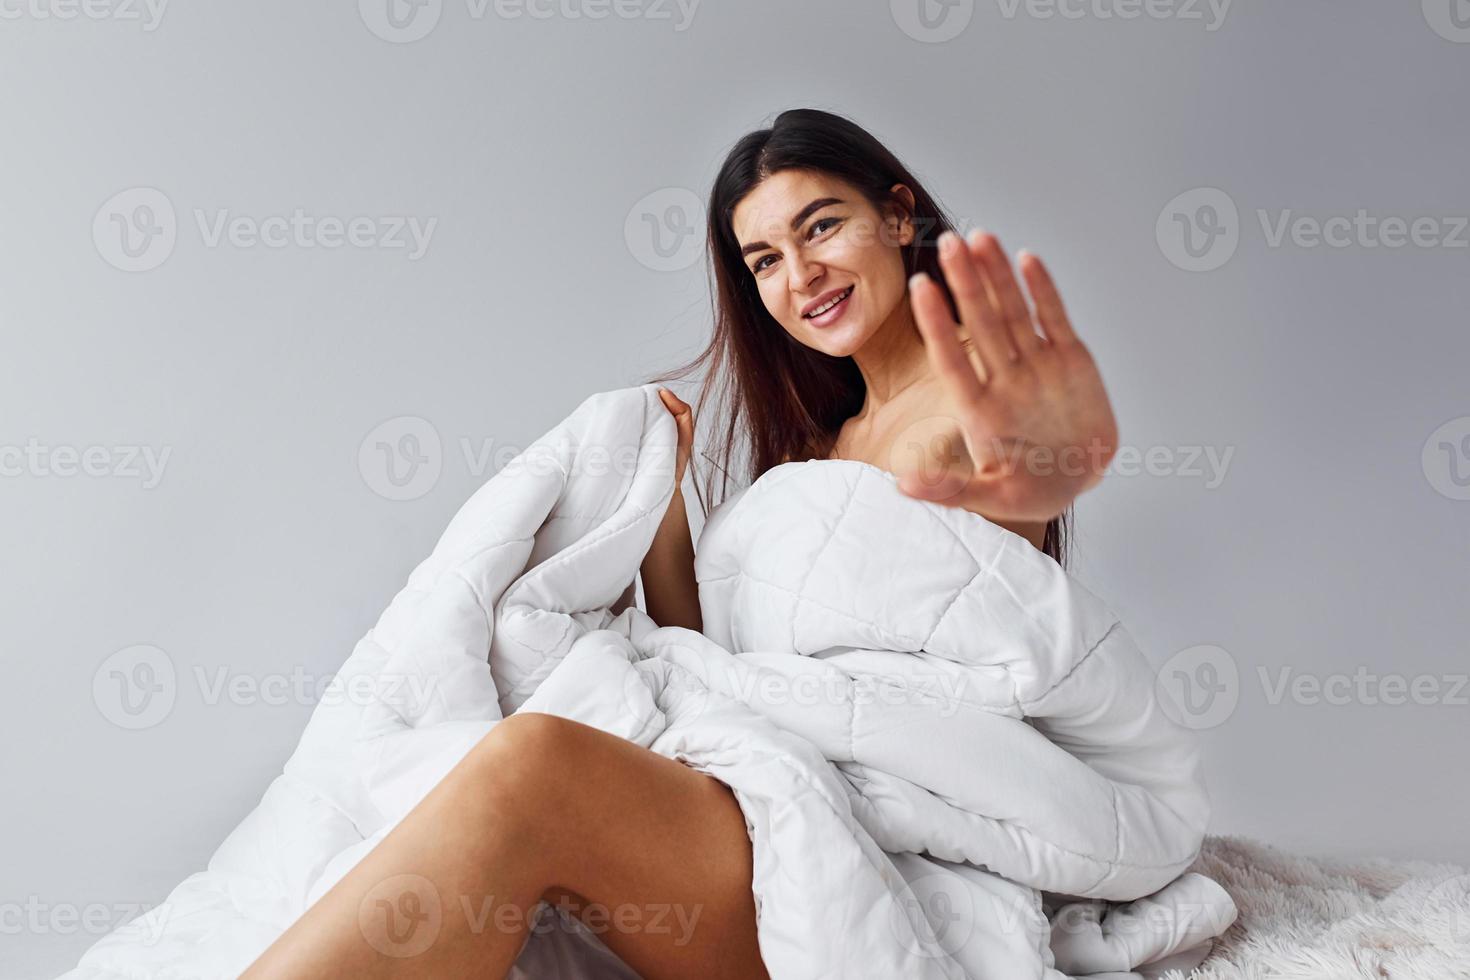 Shows stop gesture. Woman in underwear sits in the studio against white background photo